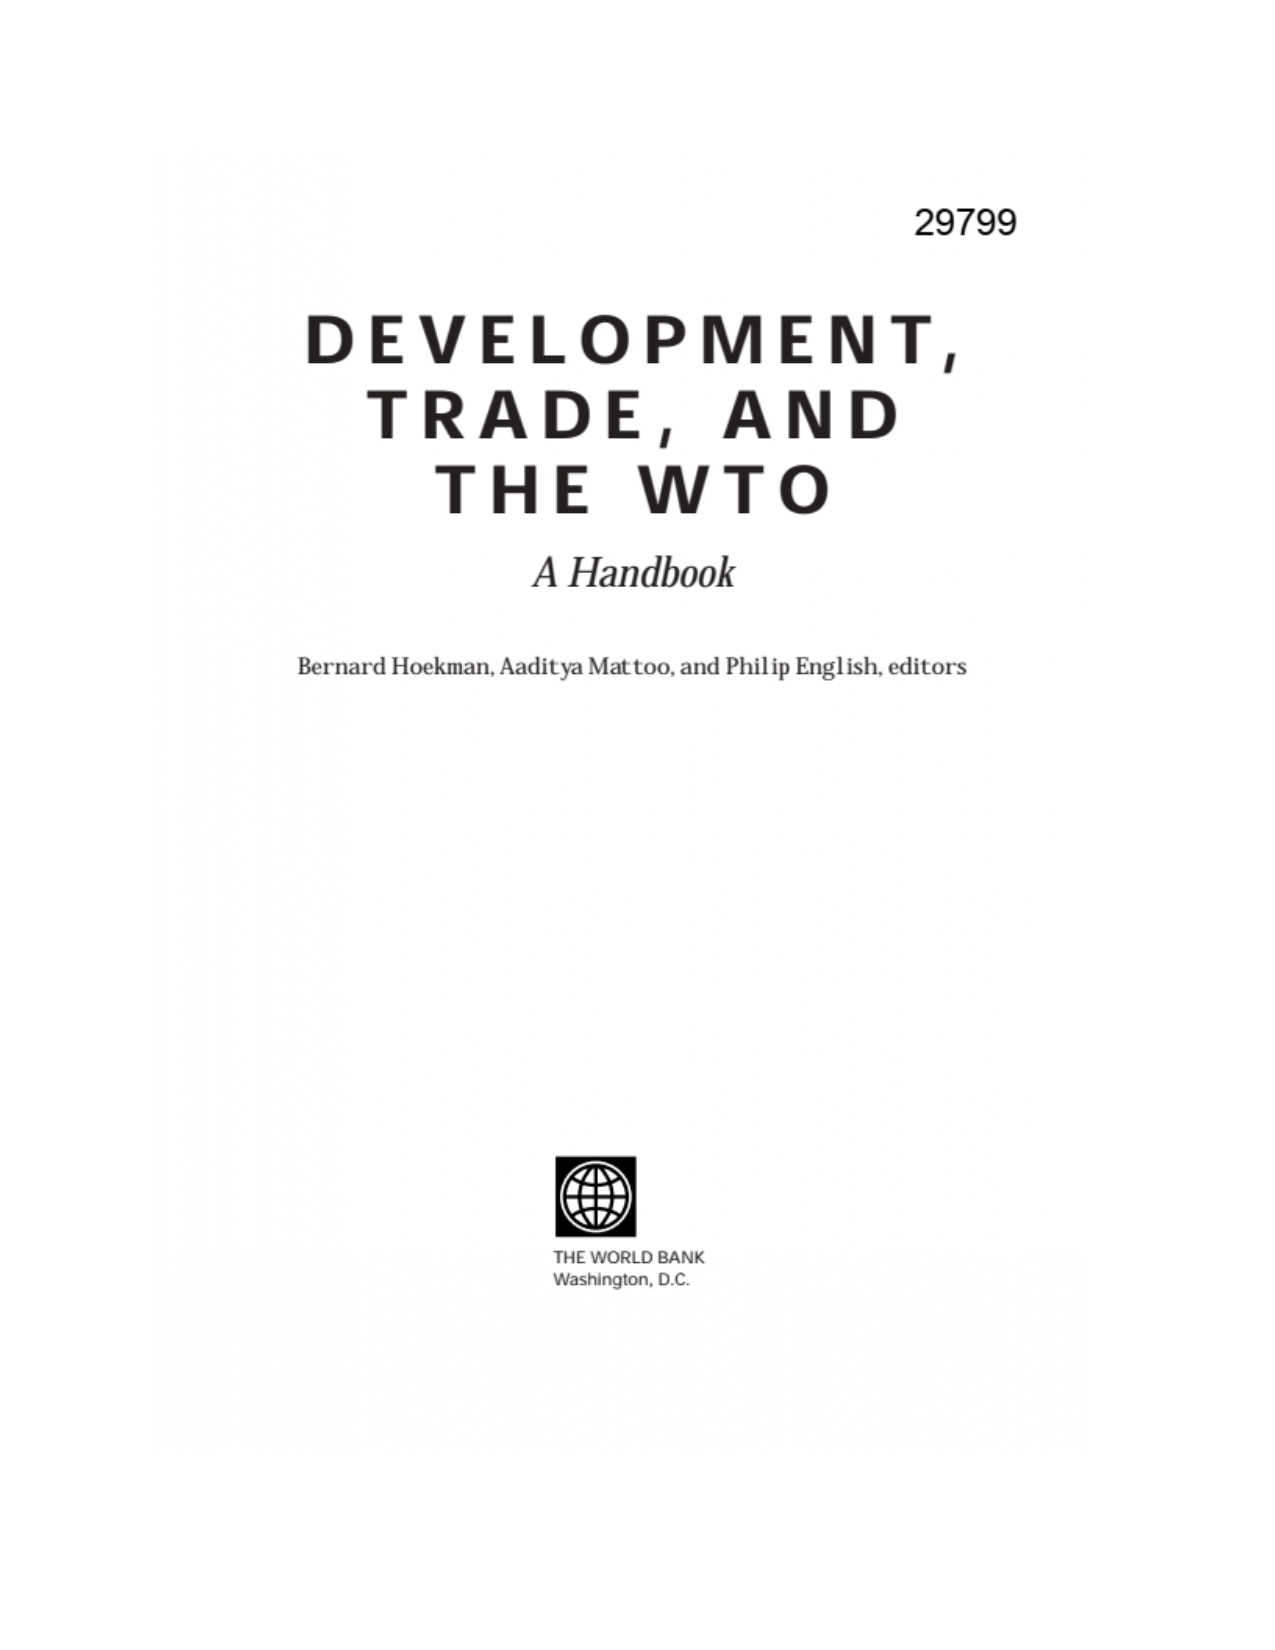 Development, Trade, and the Wto